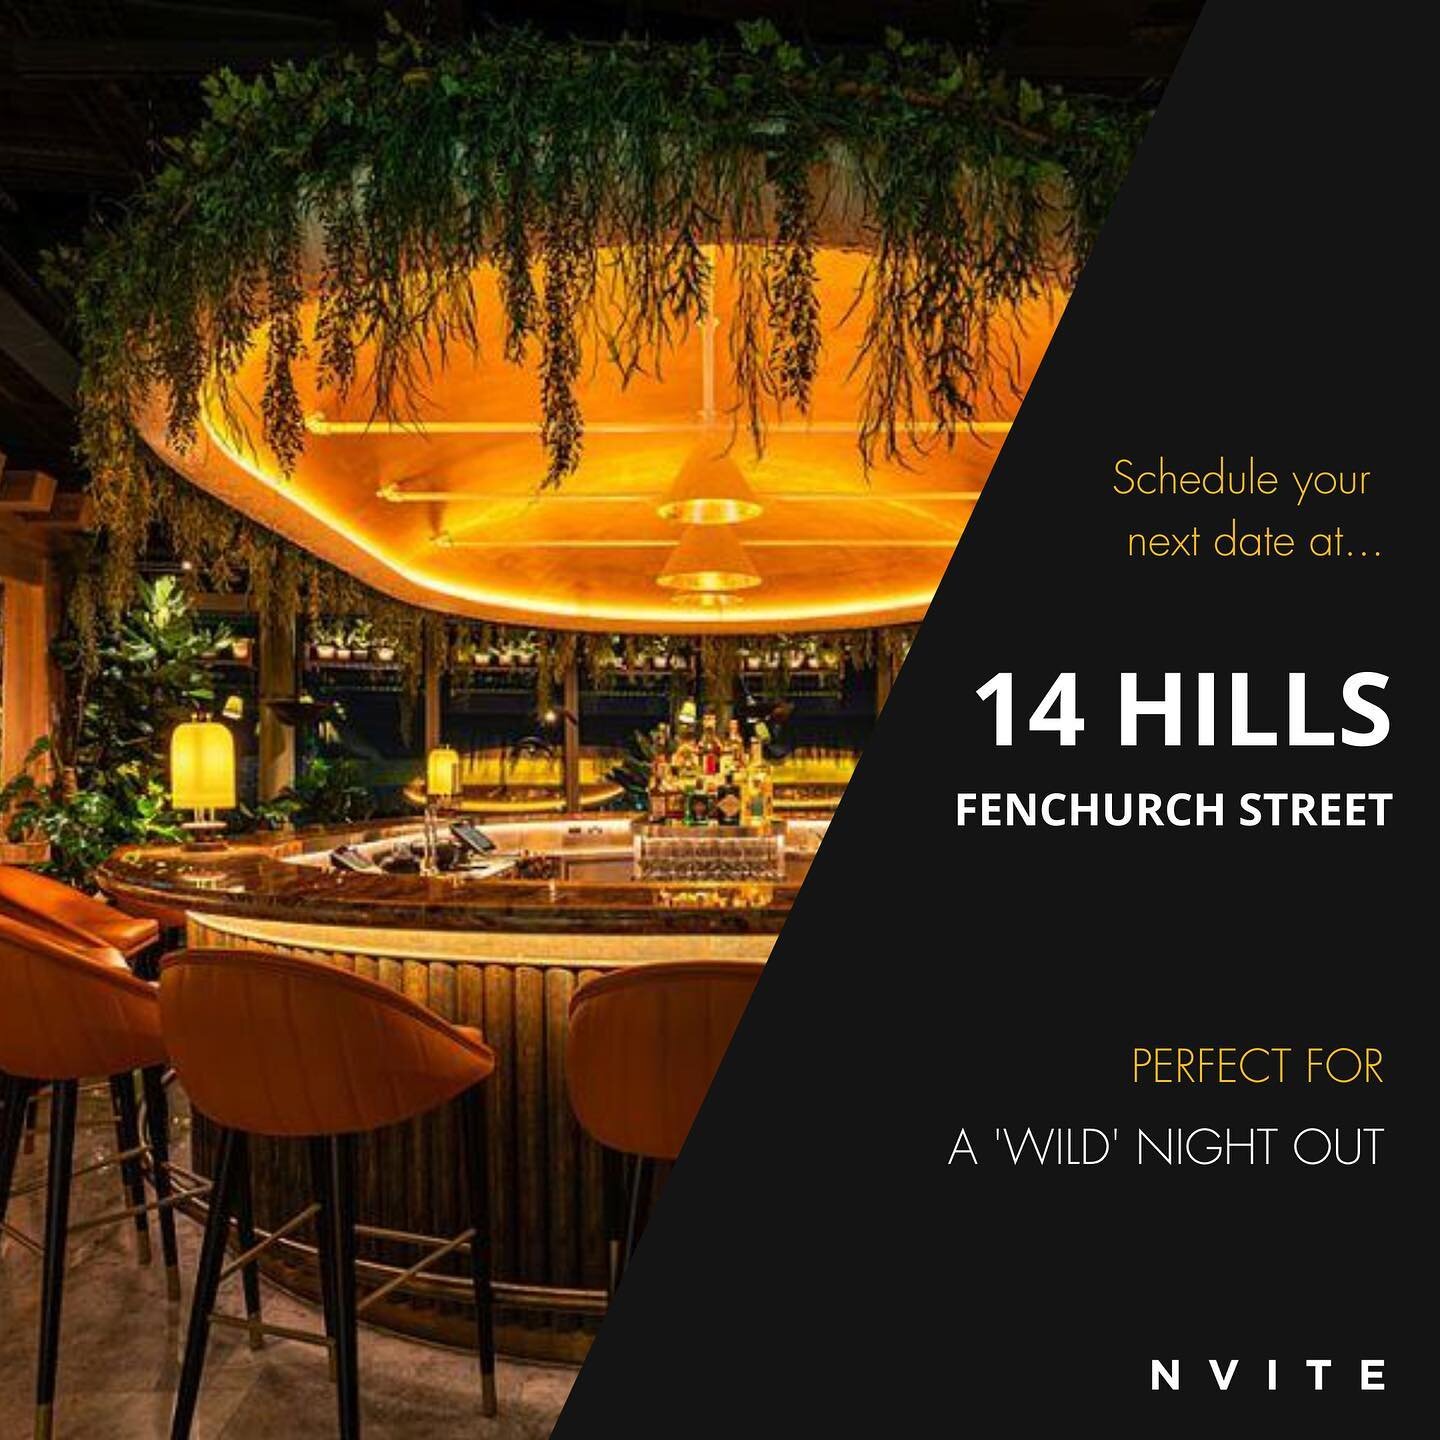 Didn&rsquo;t make it abroad this summer? Time to make up for it 😏

Escape to The Hills on Fenchurch St this bank holiday Monday, where you&rsquo;ll find yourself surrounded by lush greenery and jungle-esque vibes at this glamorous restaurant and lat